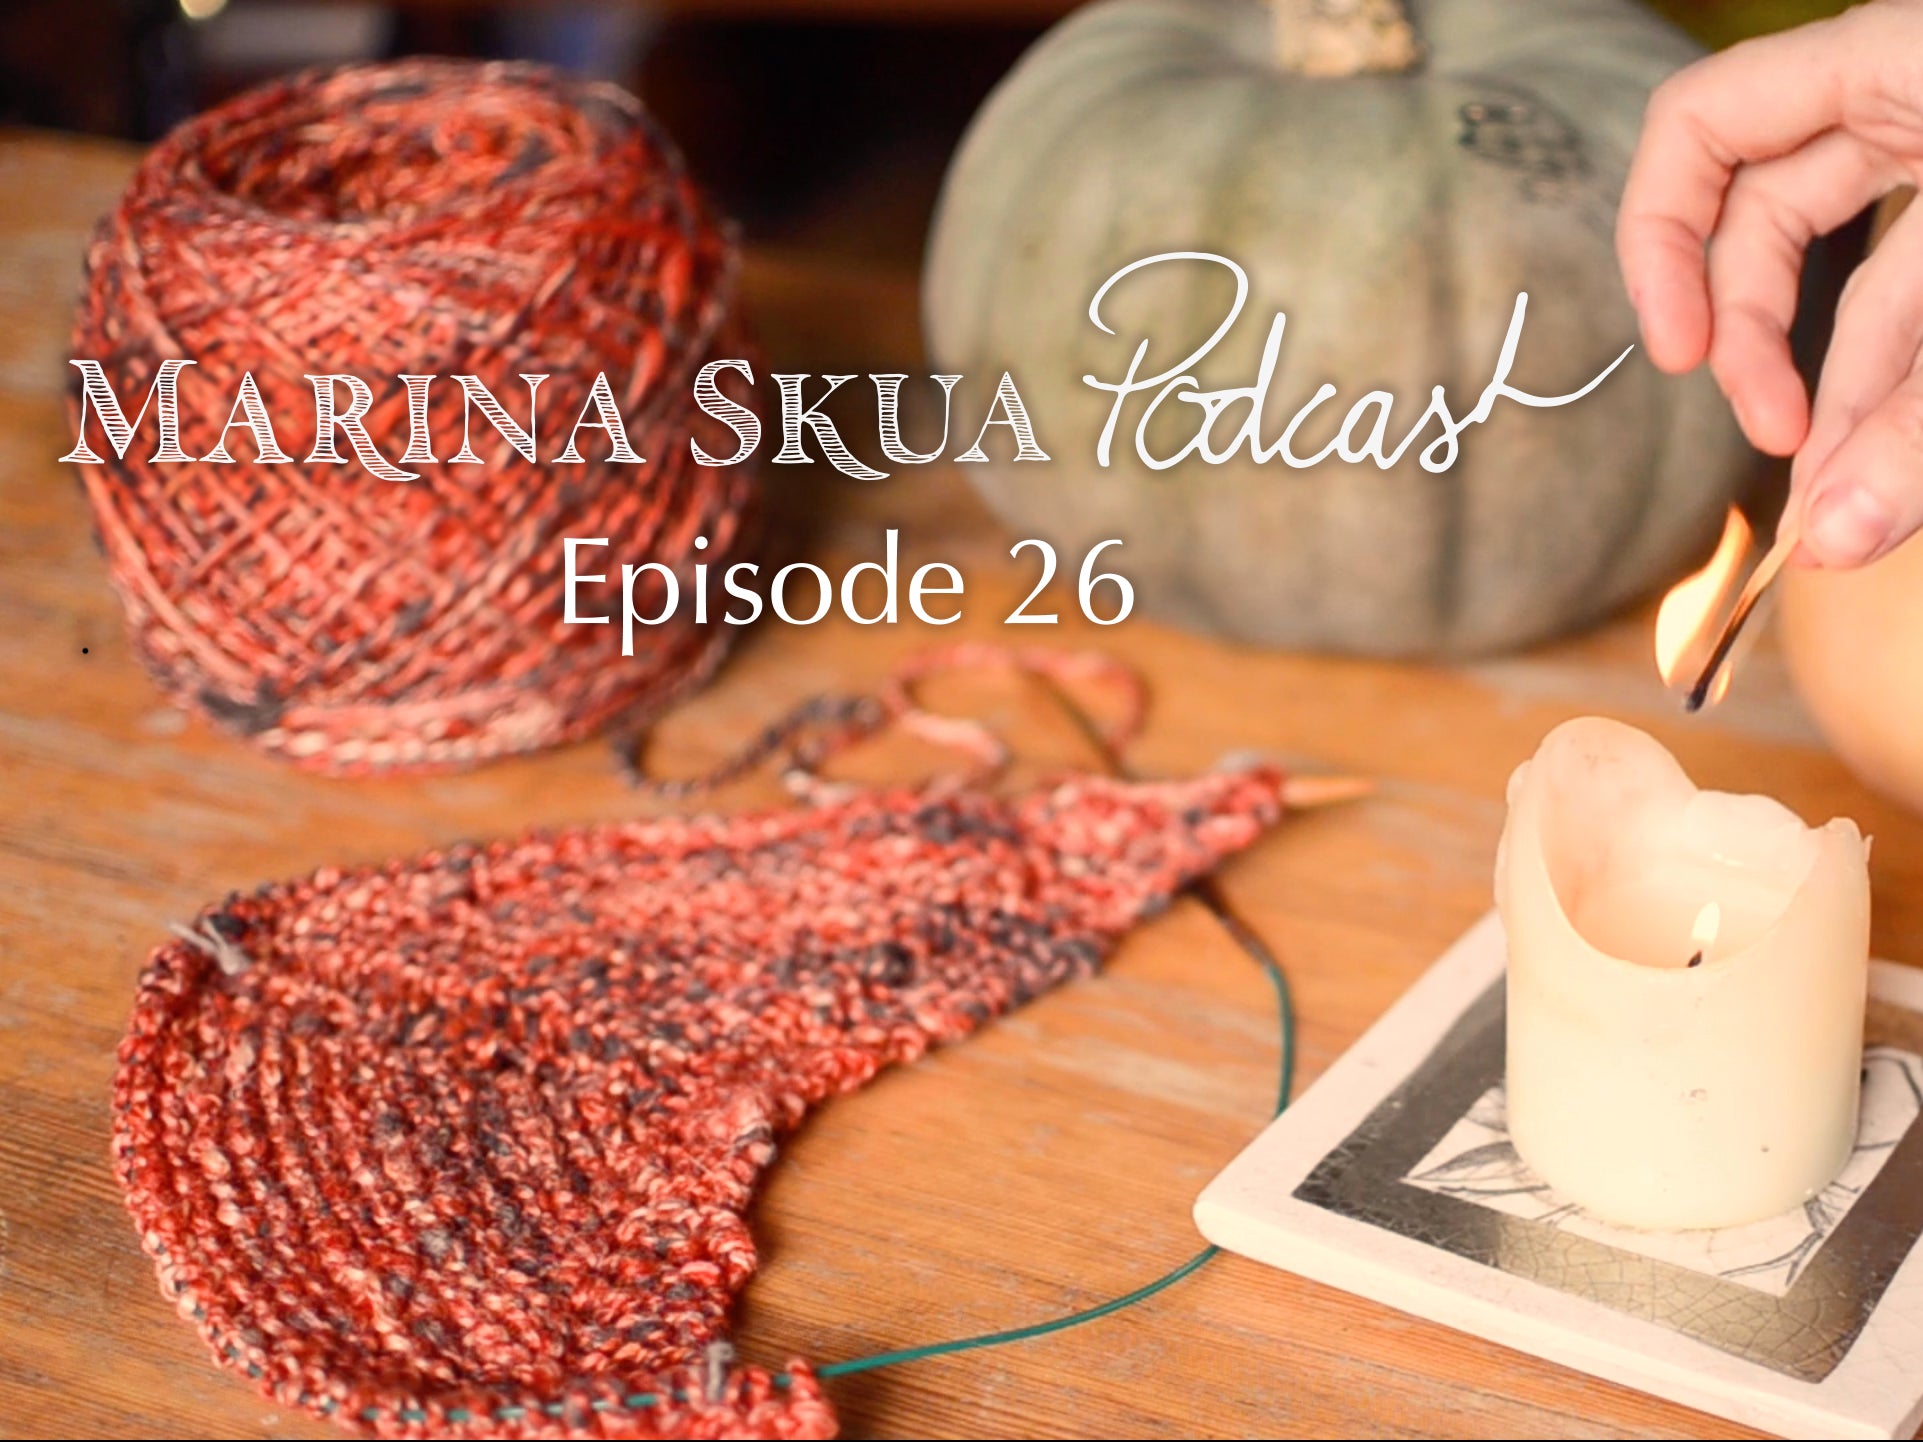 Episode 26 of the Podcast – A handspun shawl, hand-woven skirt, new hat design and mending a shirt